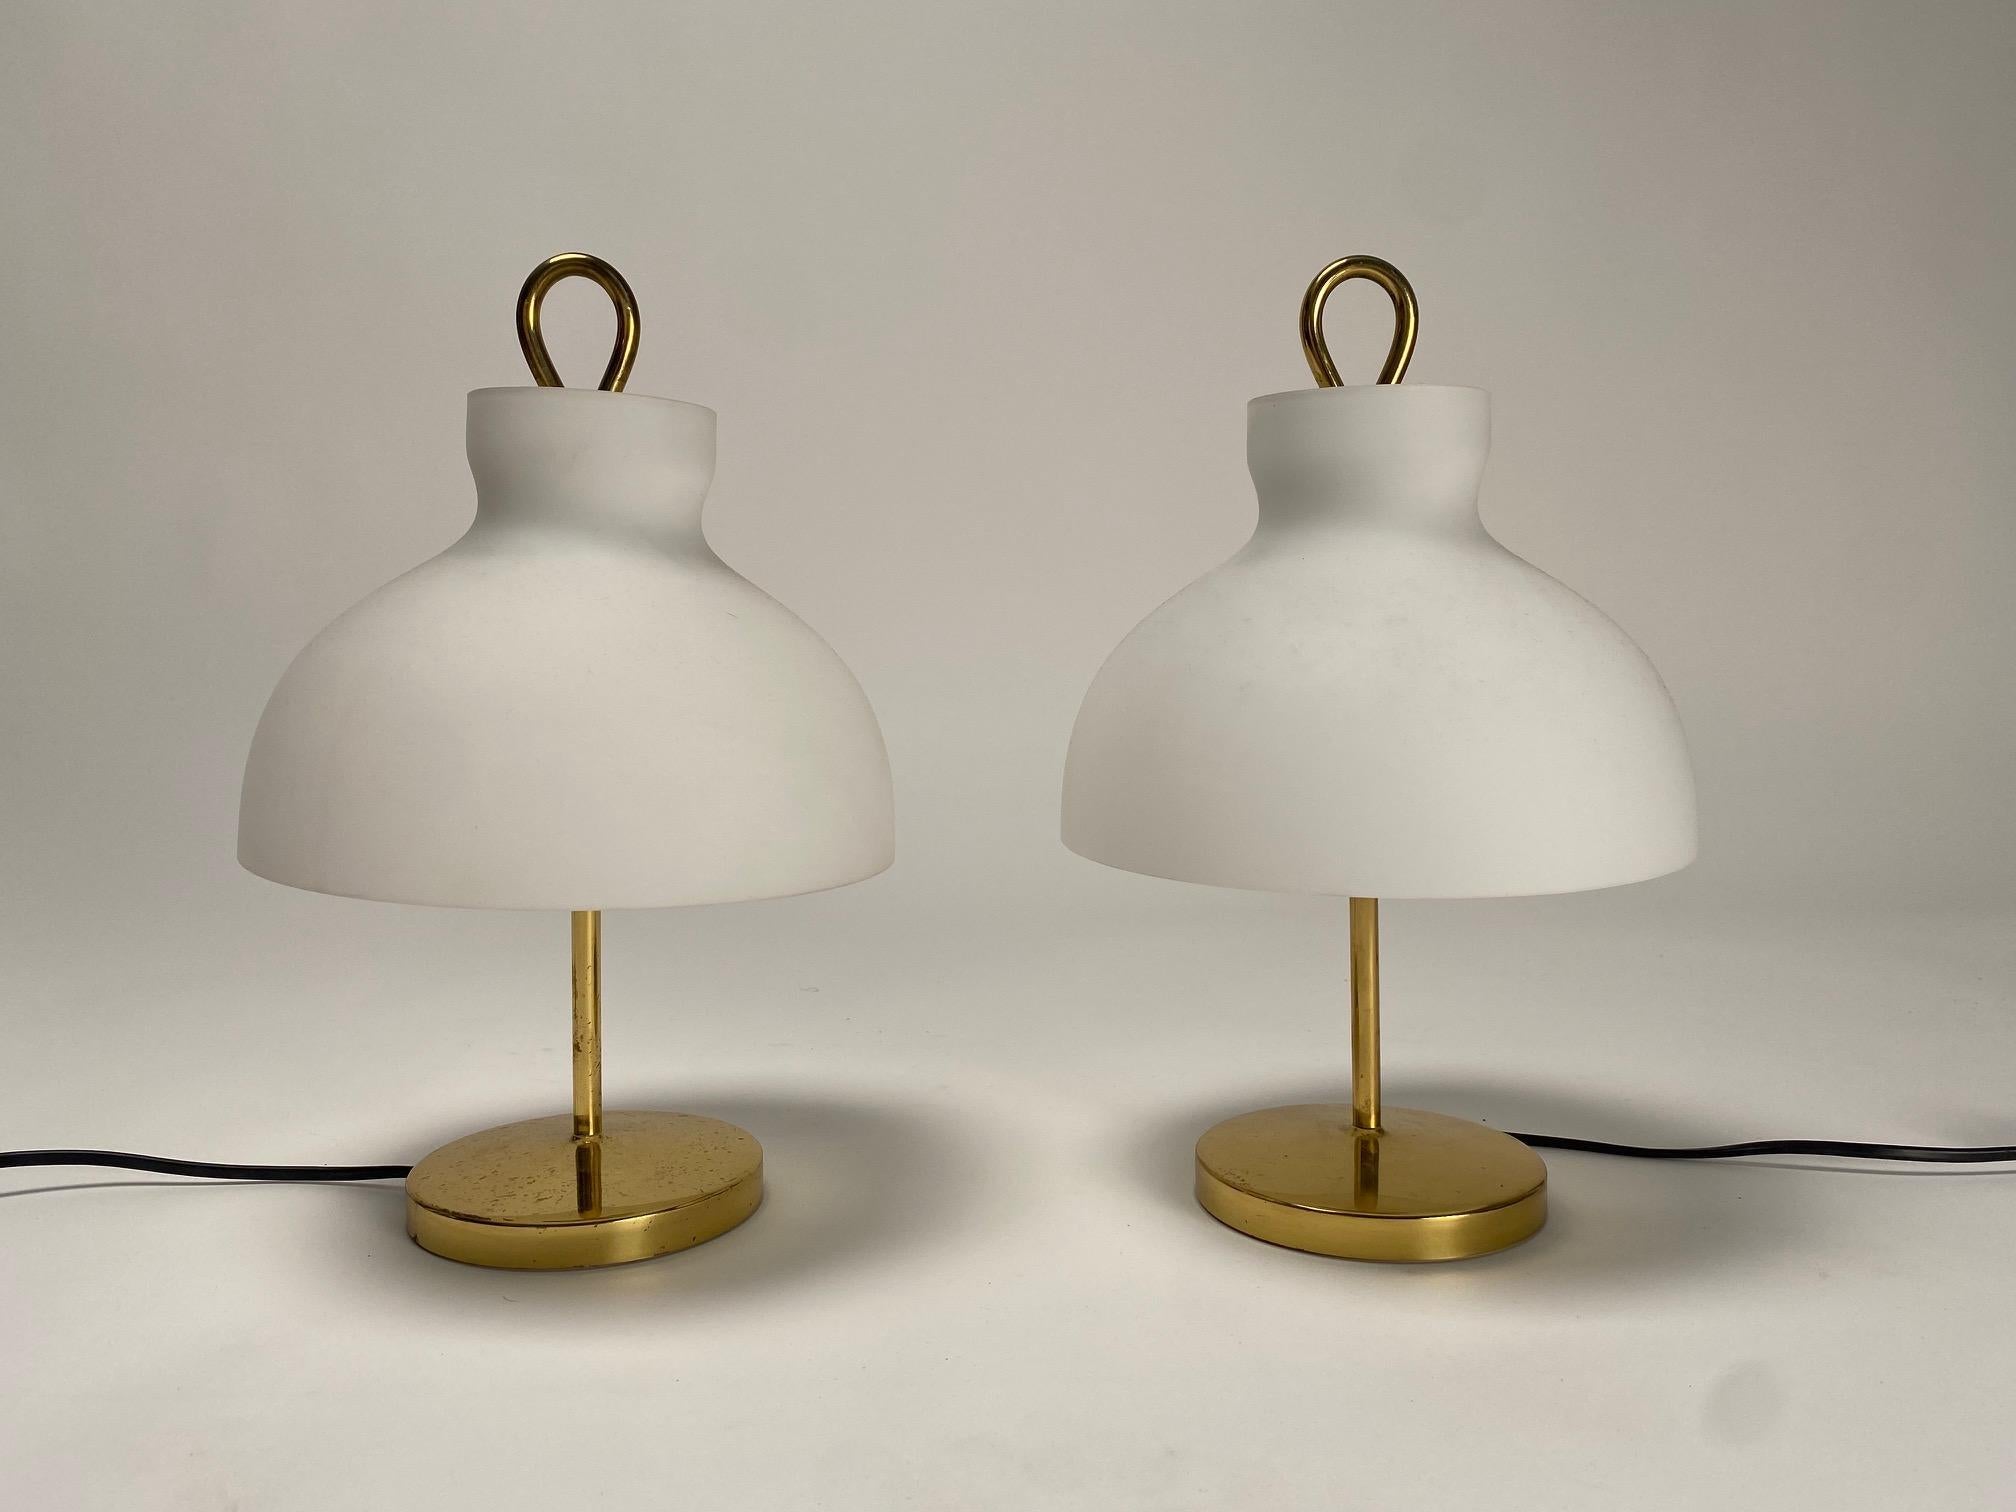 Pair of Arenzano table lamps made by the famous Italian designer Ignazio Gardella for the Azucena company

This pair of lamps, in brass and opaline glass, comes from an important Milanese residence and shows the patina of time that characterizes it